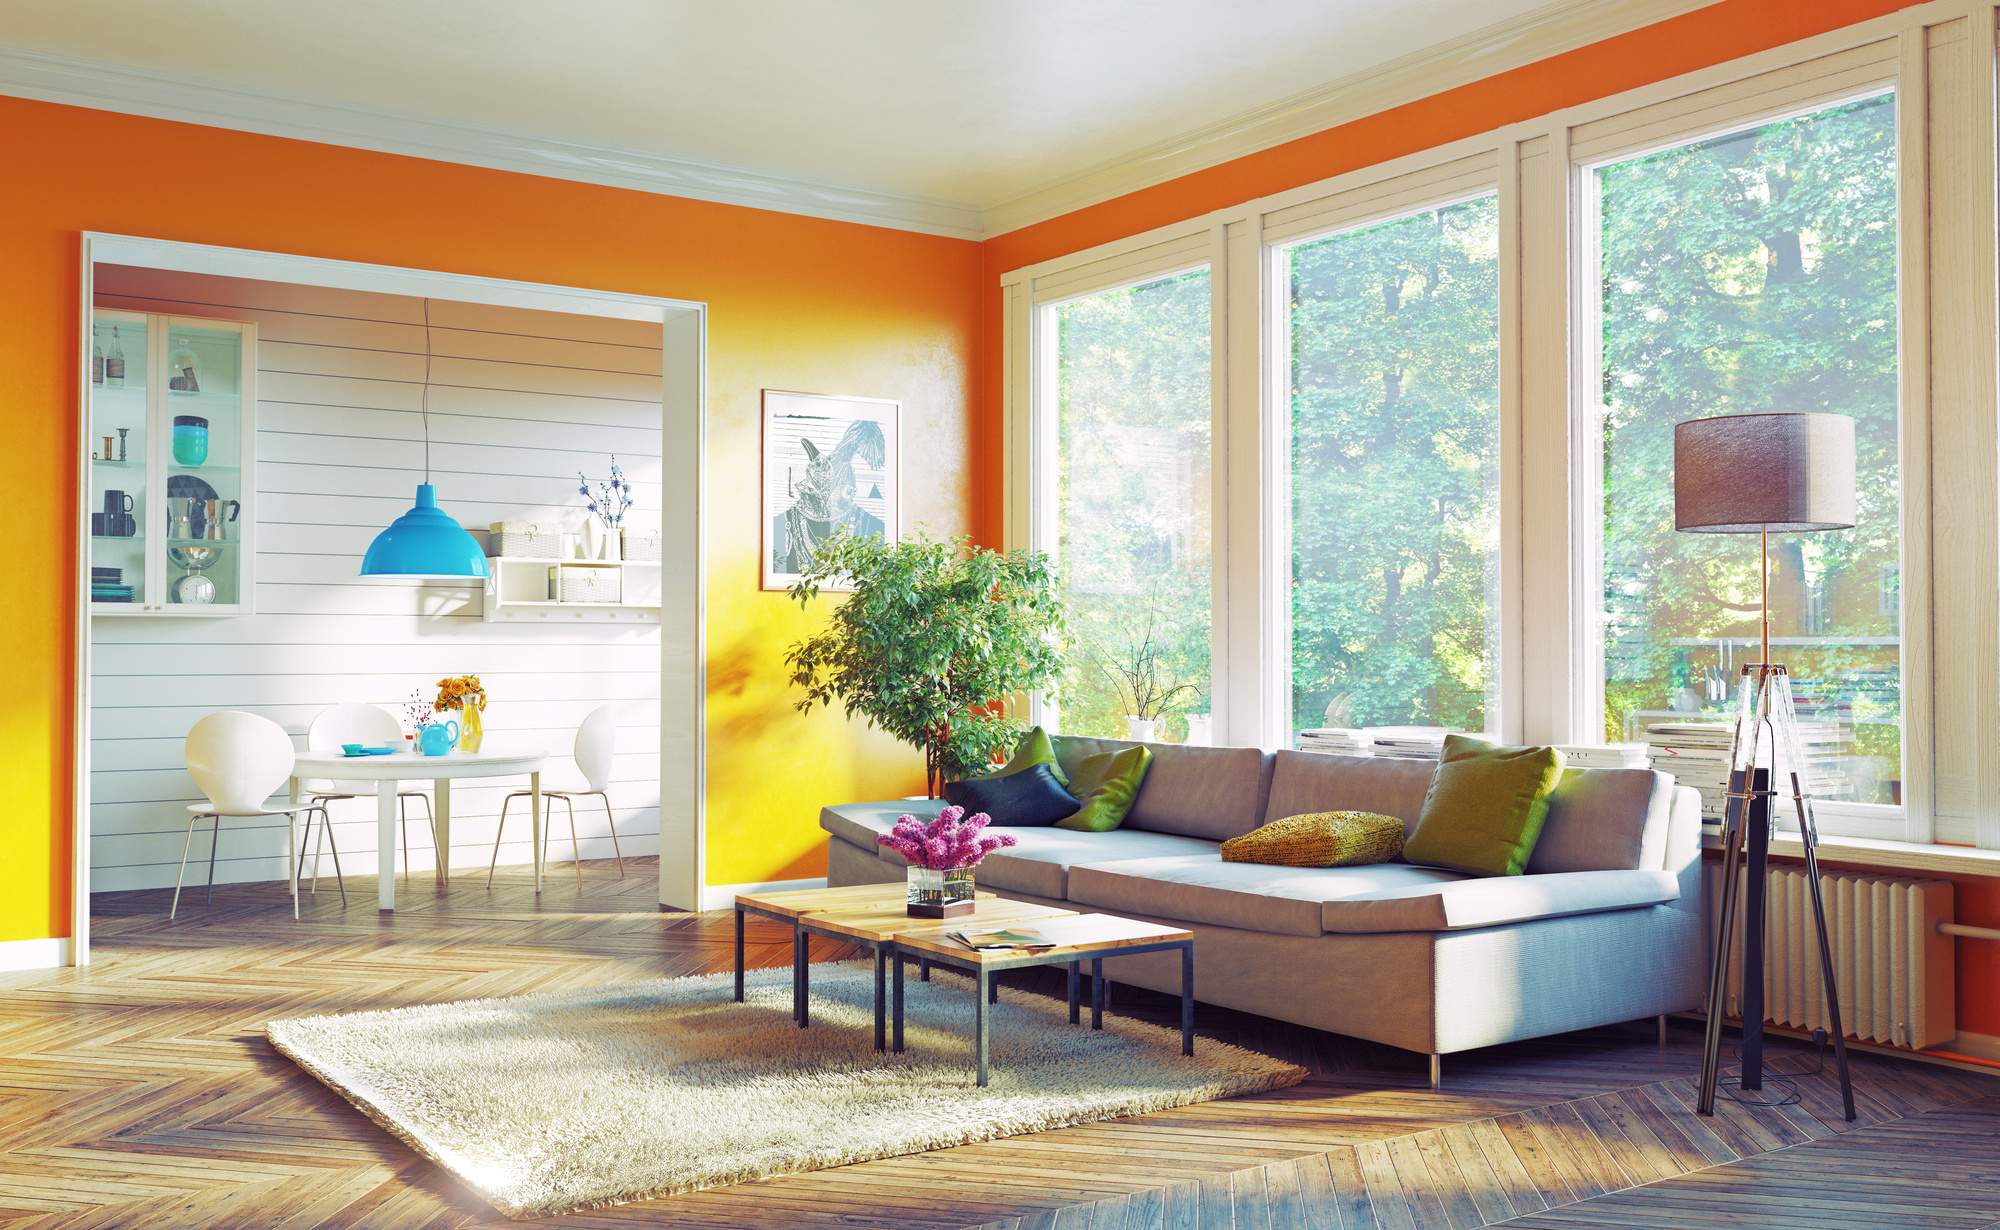 4 Attractive Updates for Creating a Modernized Home